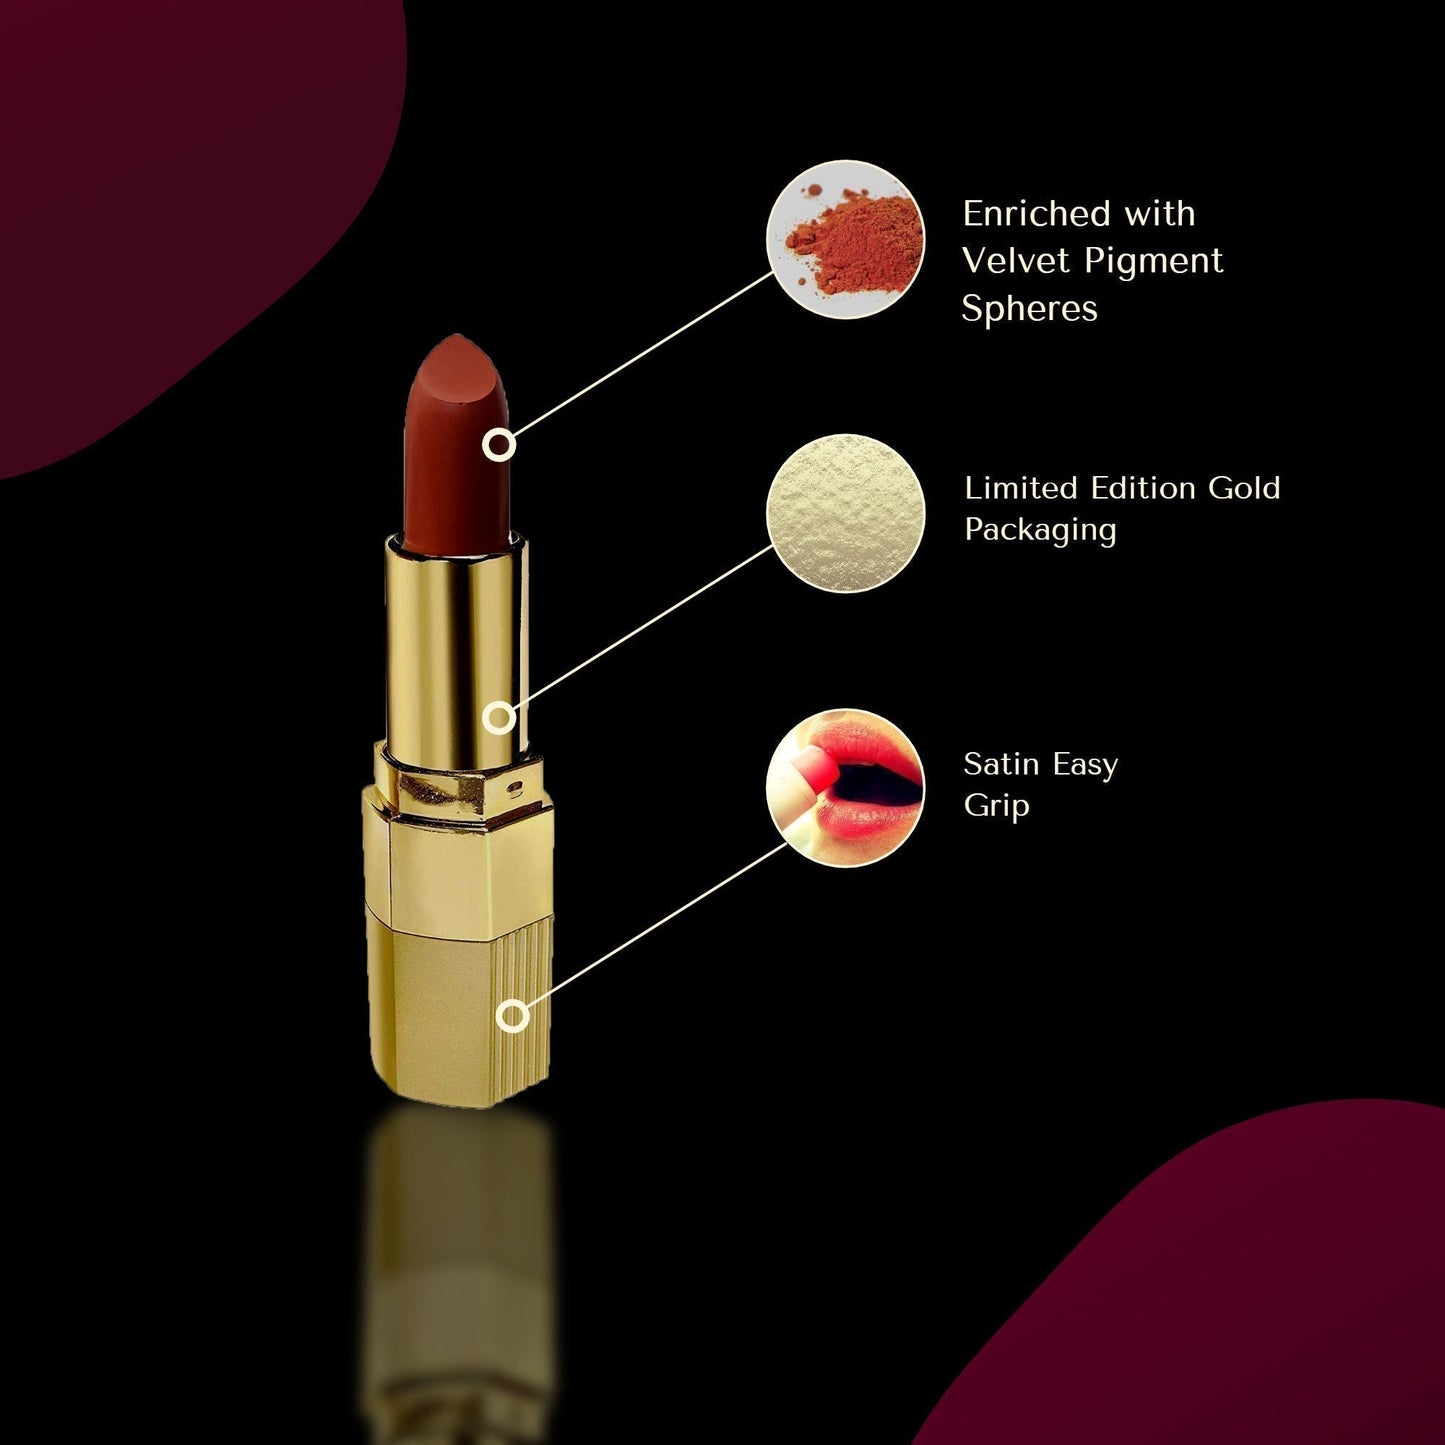 Krayons Desire Matte Lipstick, Highly Pigmented, Longlasting, 3.5g Each, Combo, Pack of 2 (Caramel Brown, Cherry Love)